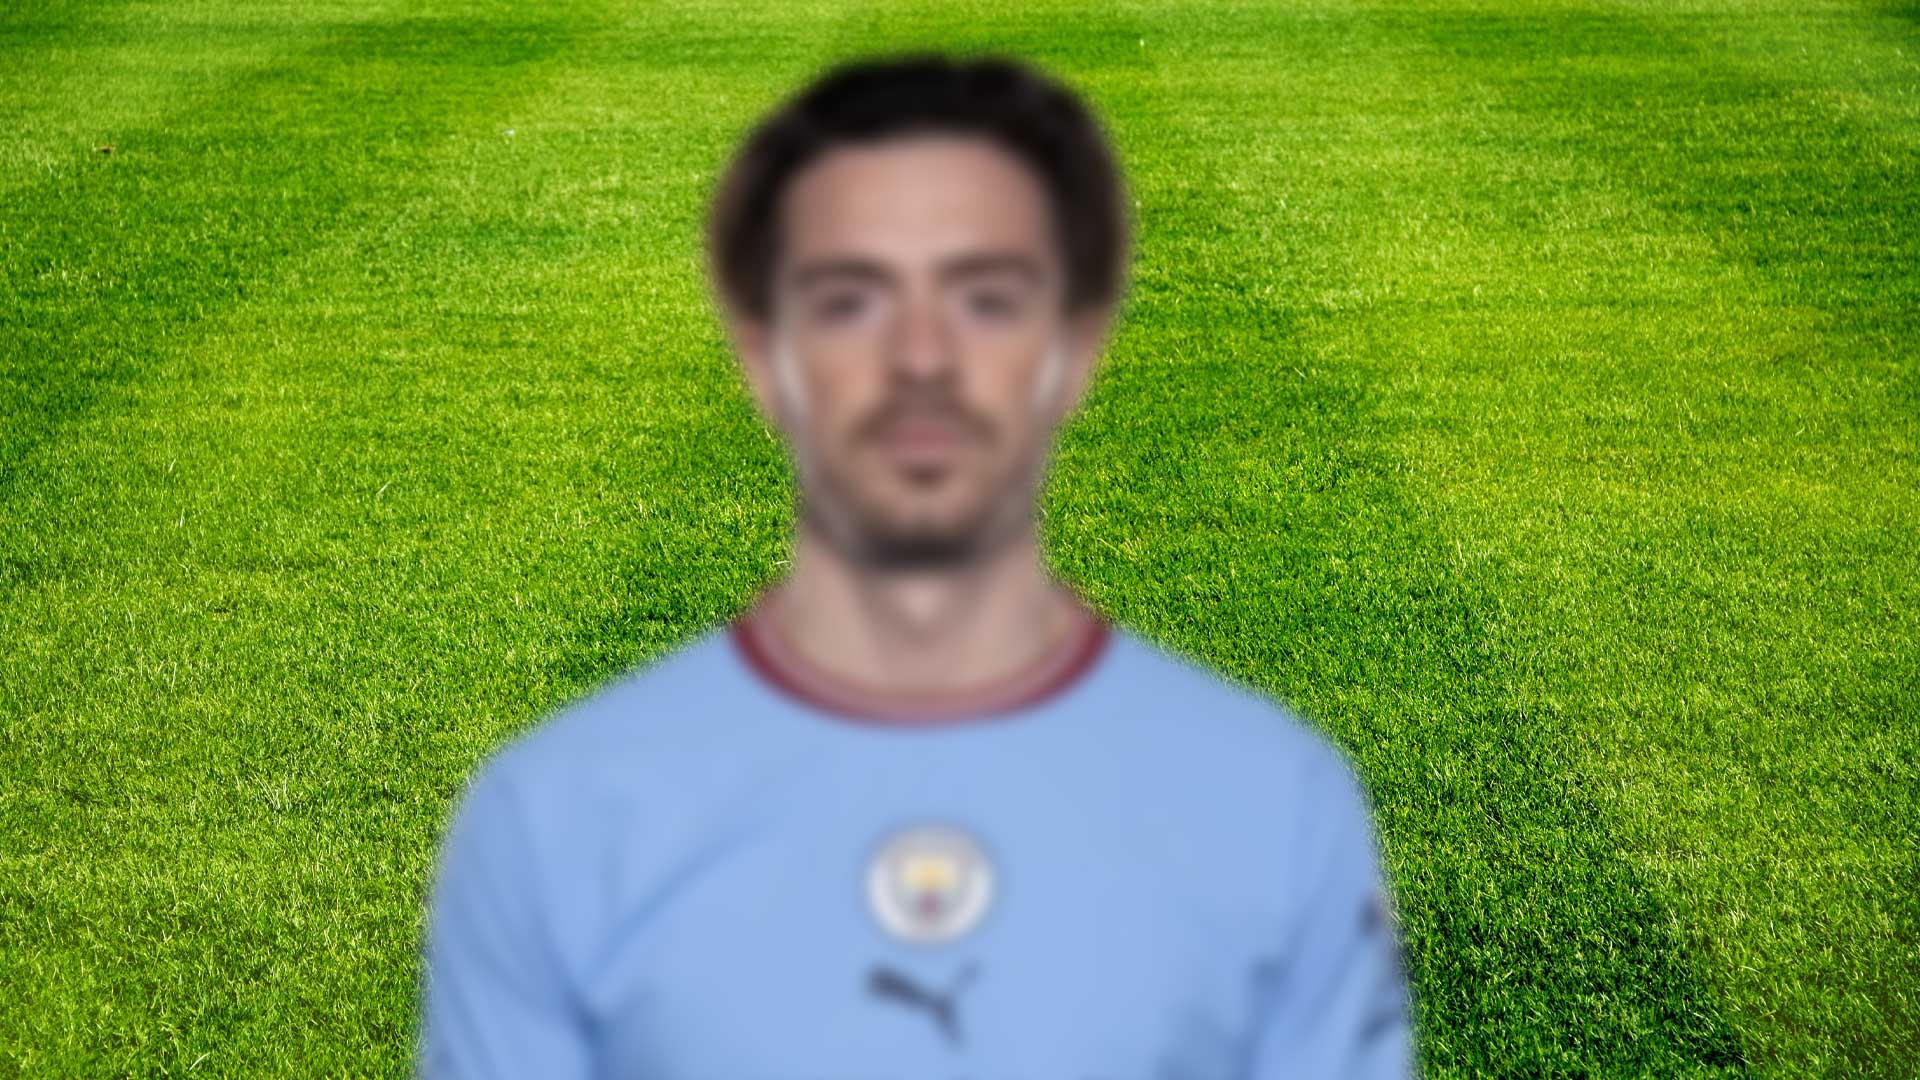 A blurred Manchester City player